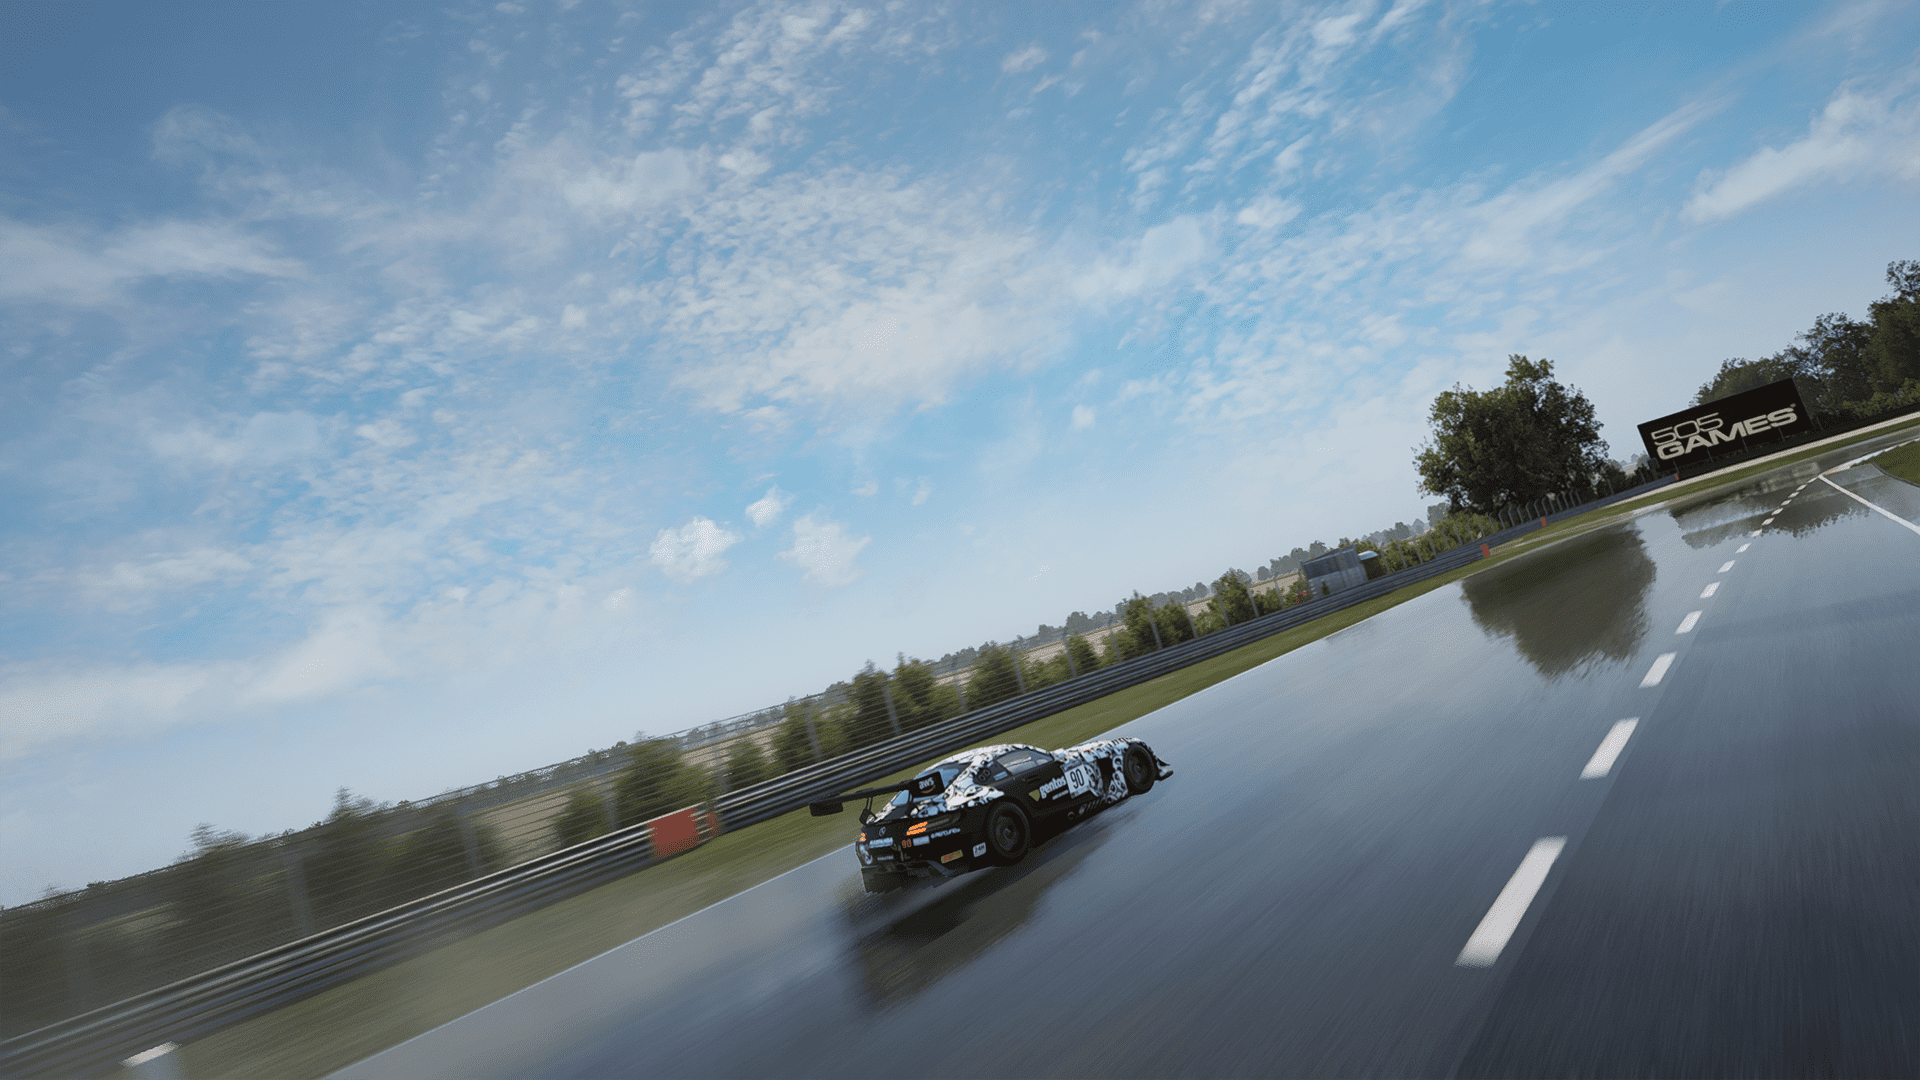 Assetto Corsa Competizione PS5 Xbox Series X|S v1.8 update coming in September